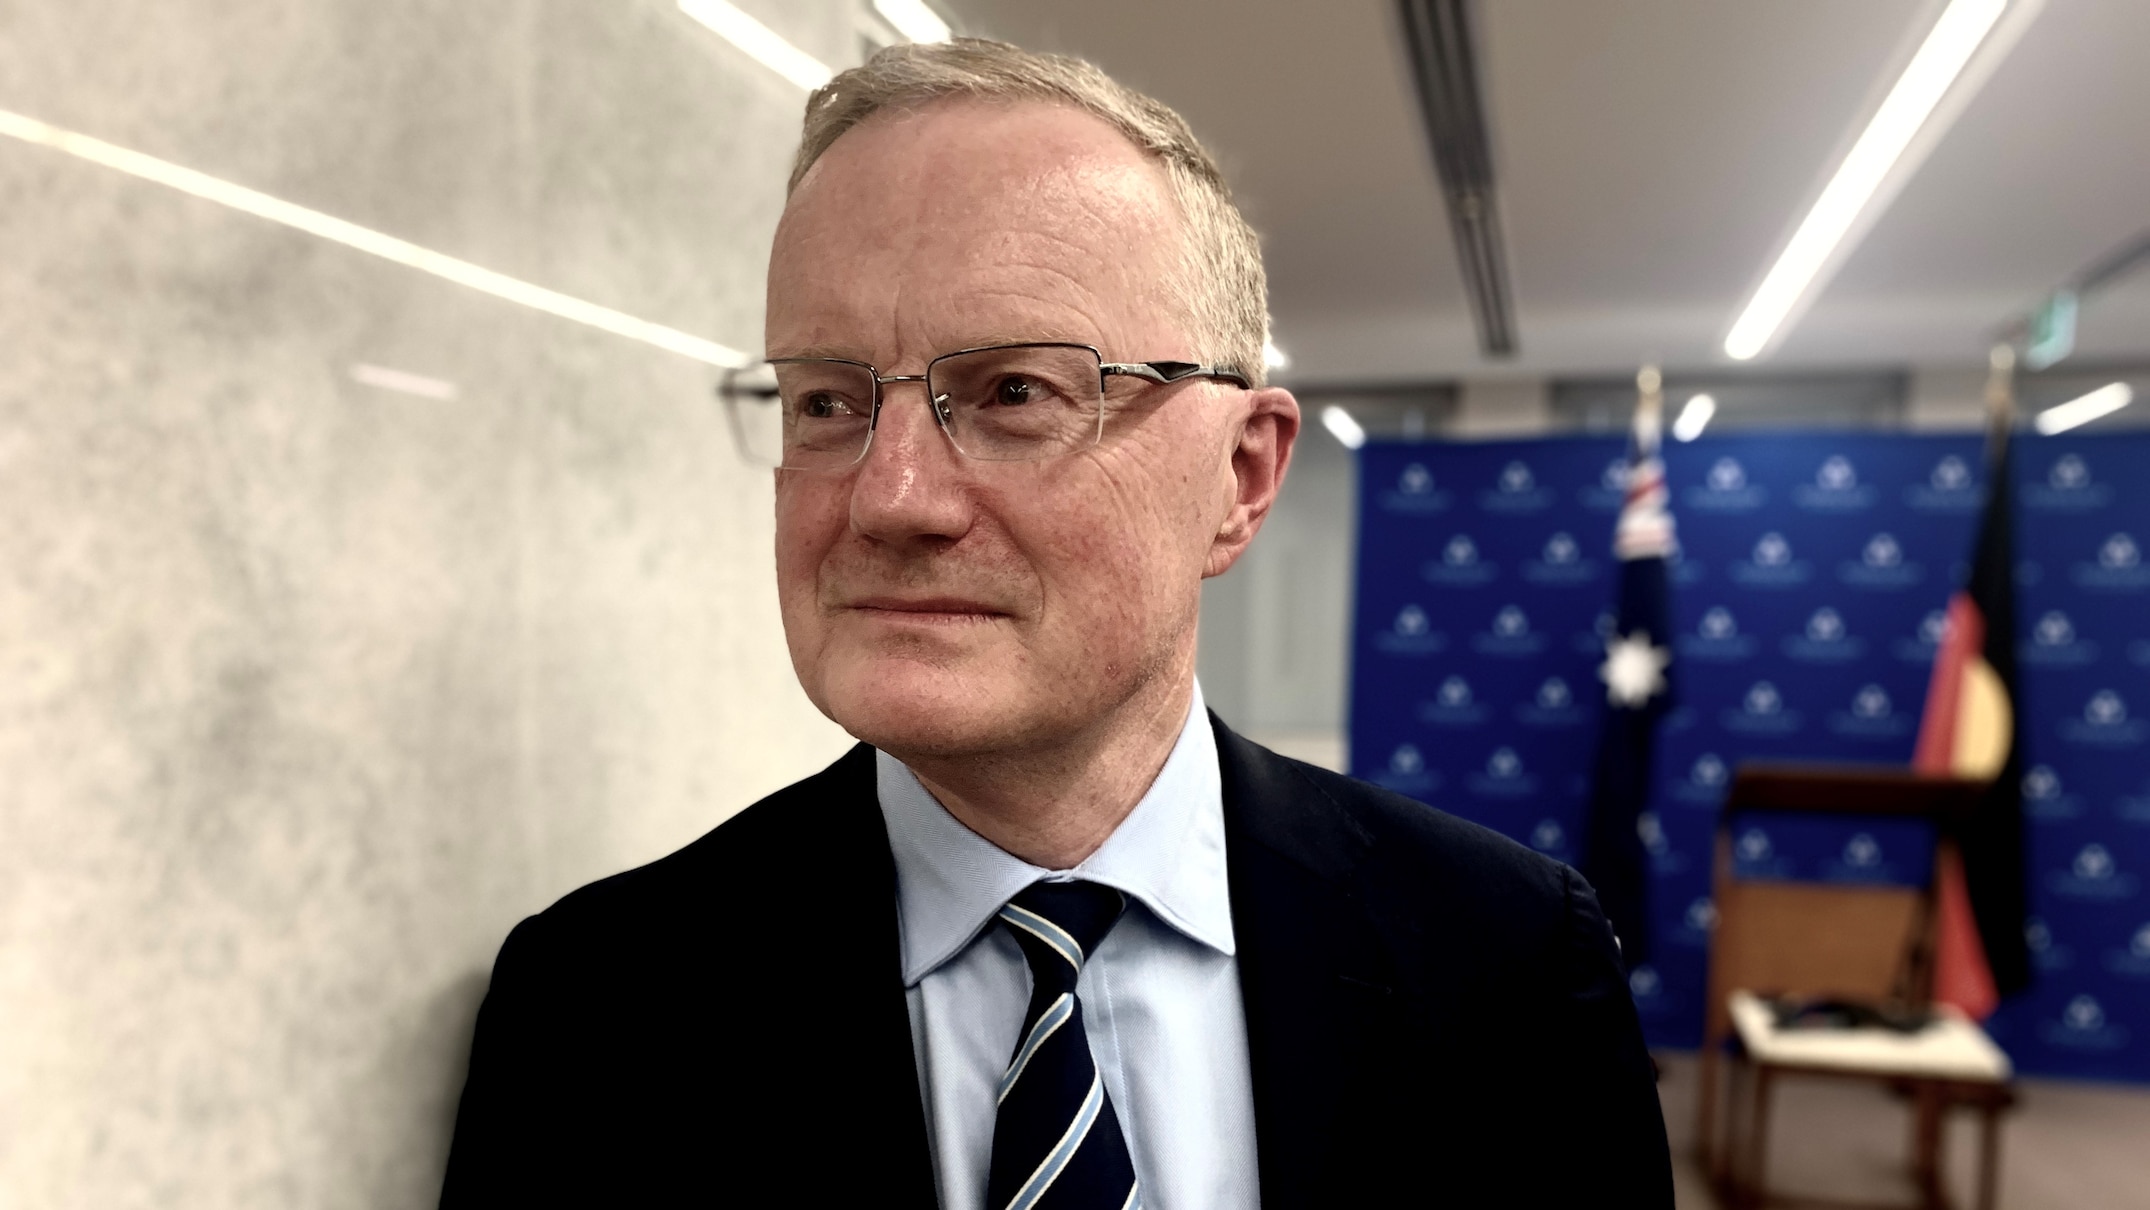 RBA governor Philip Lowe said how high interest rates need to go, and how fast they get there, will be guided by economic data. (ABC News: John Gunn)